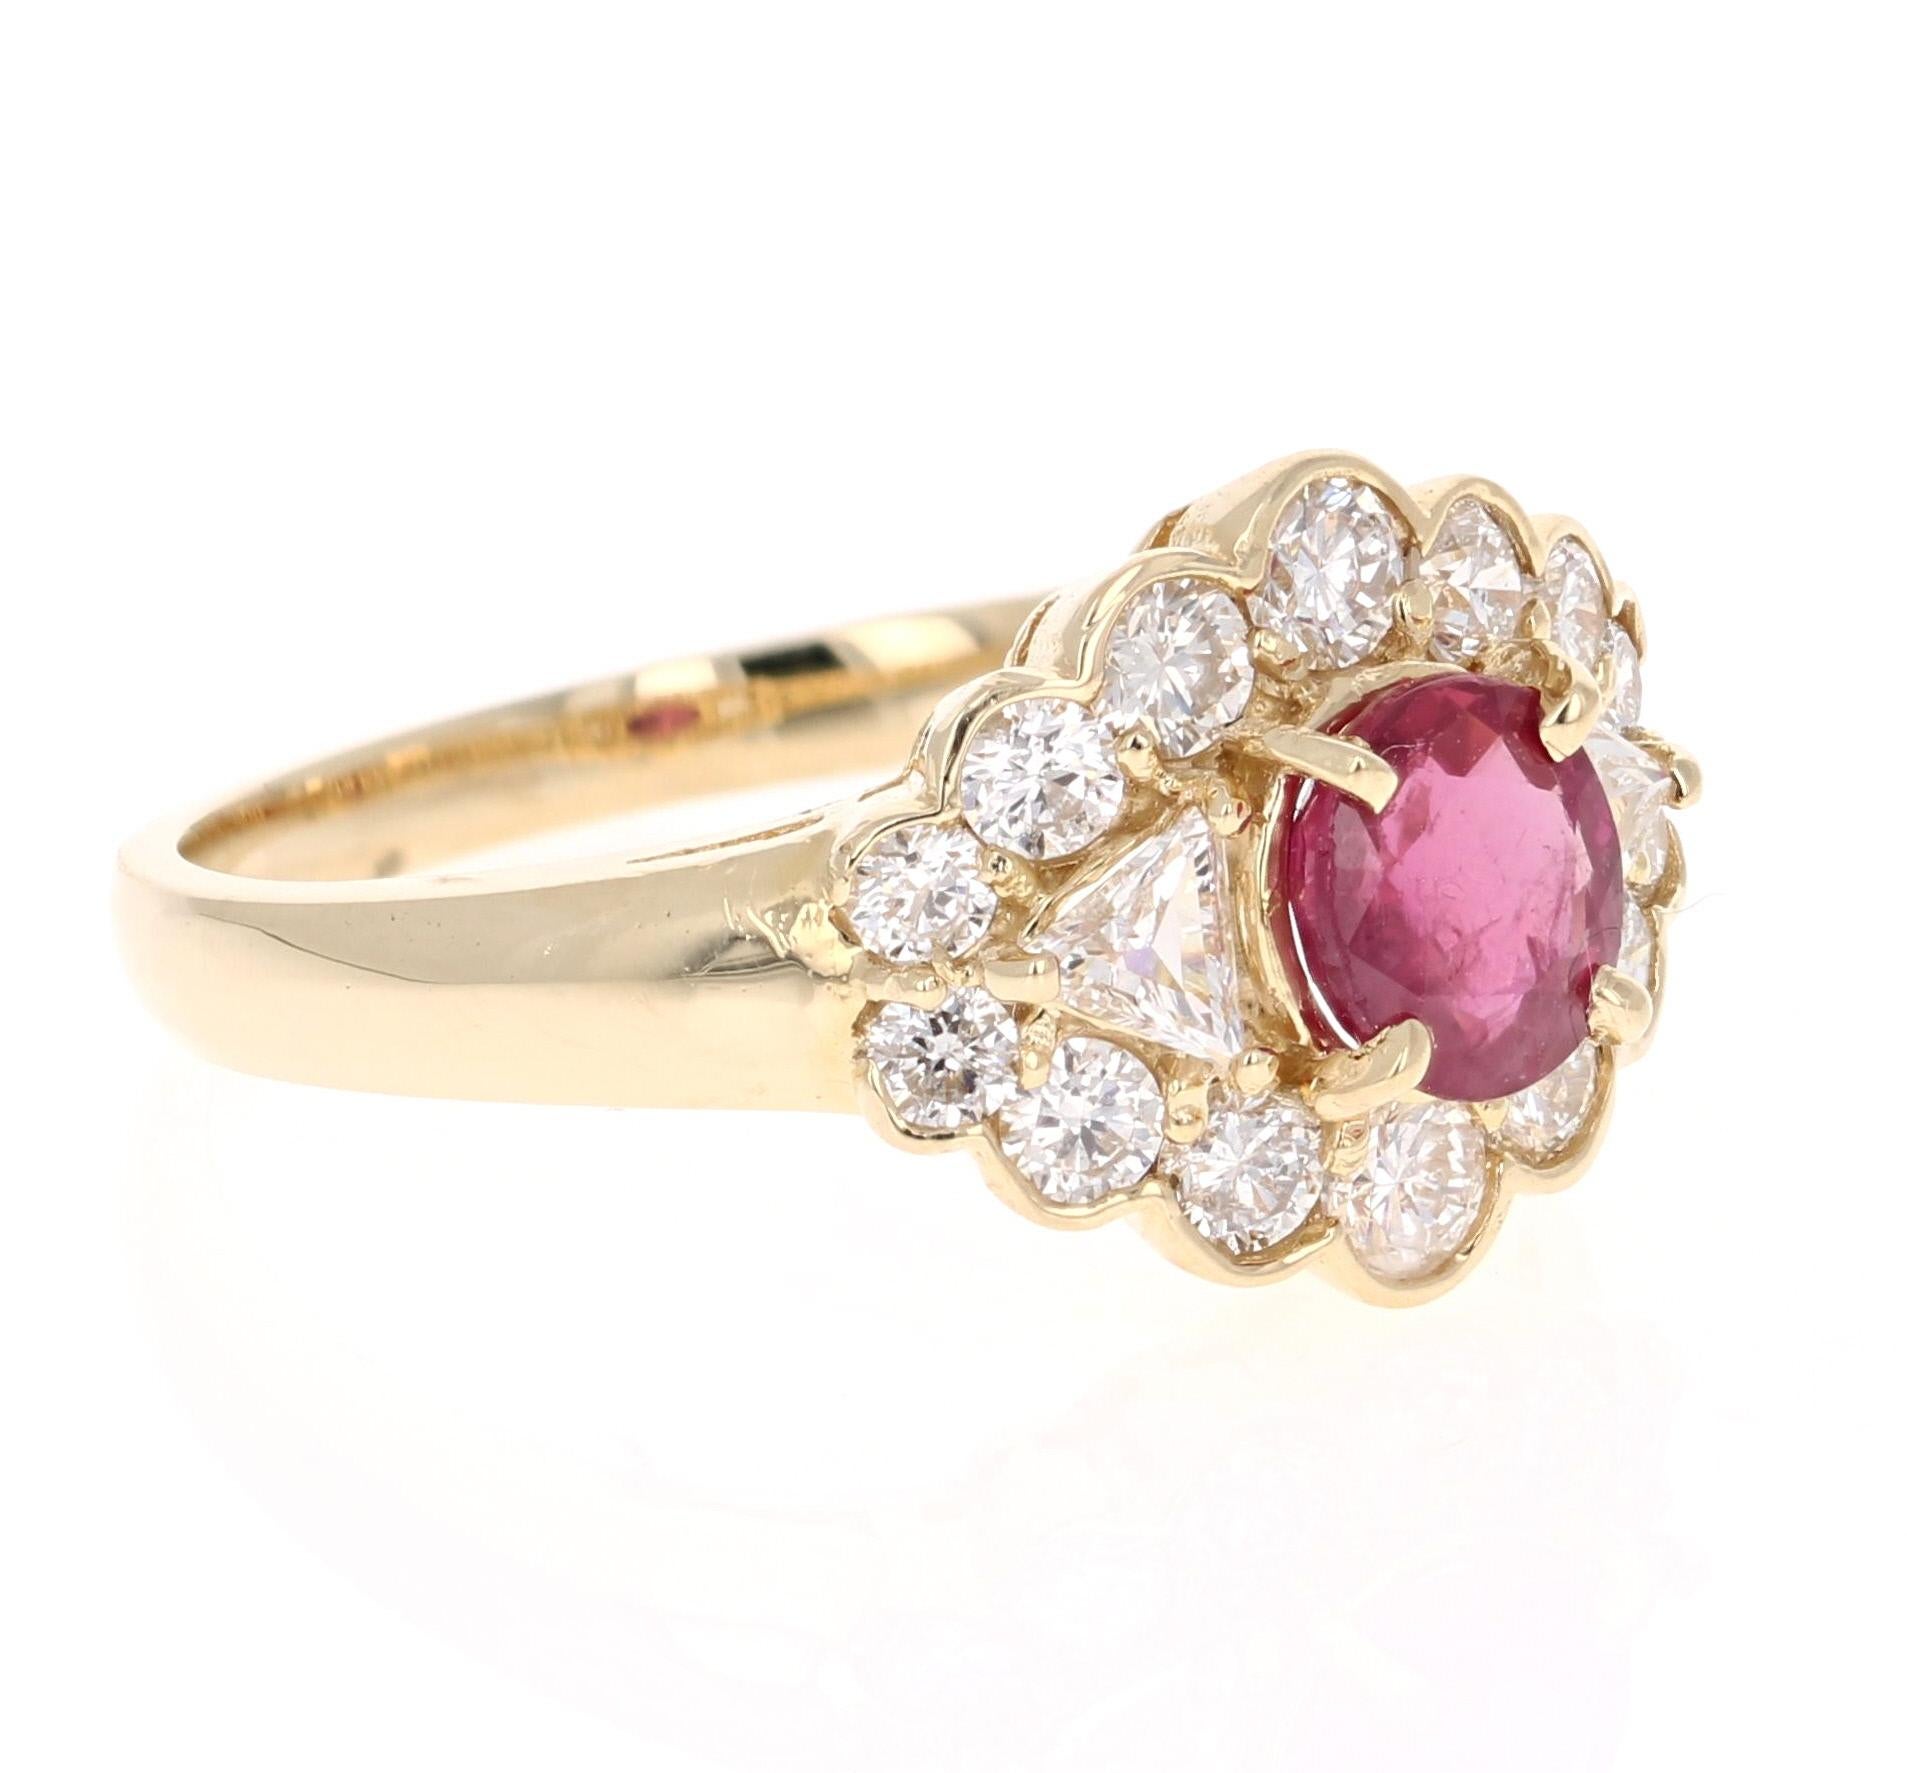 Daily, Dazzling and Unique Stunner! 

This ring has an Oval Cut Burmese Ruby that weighs 0.85 Carats and 14 Round Cut Diamonds that weigh 0.75 carats and 2 Trillion Cut Diamonds that weigh 0.15 carats with a clarity and color of SI2-F.  The total